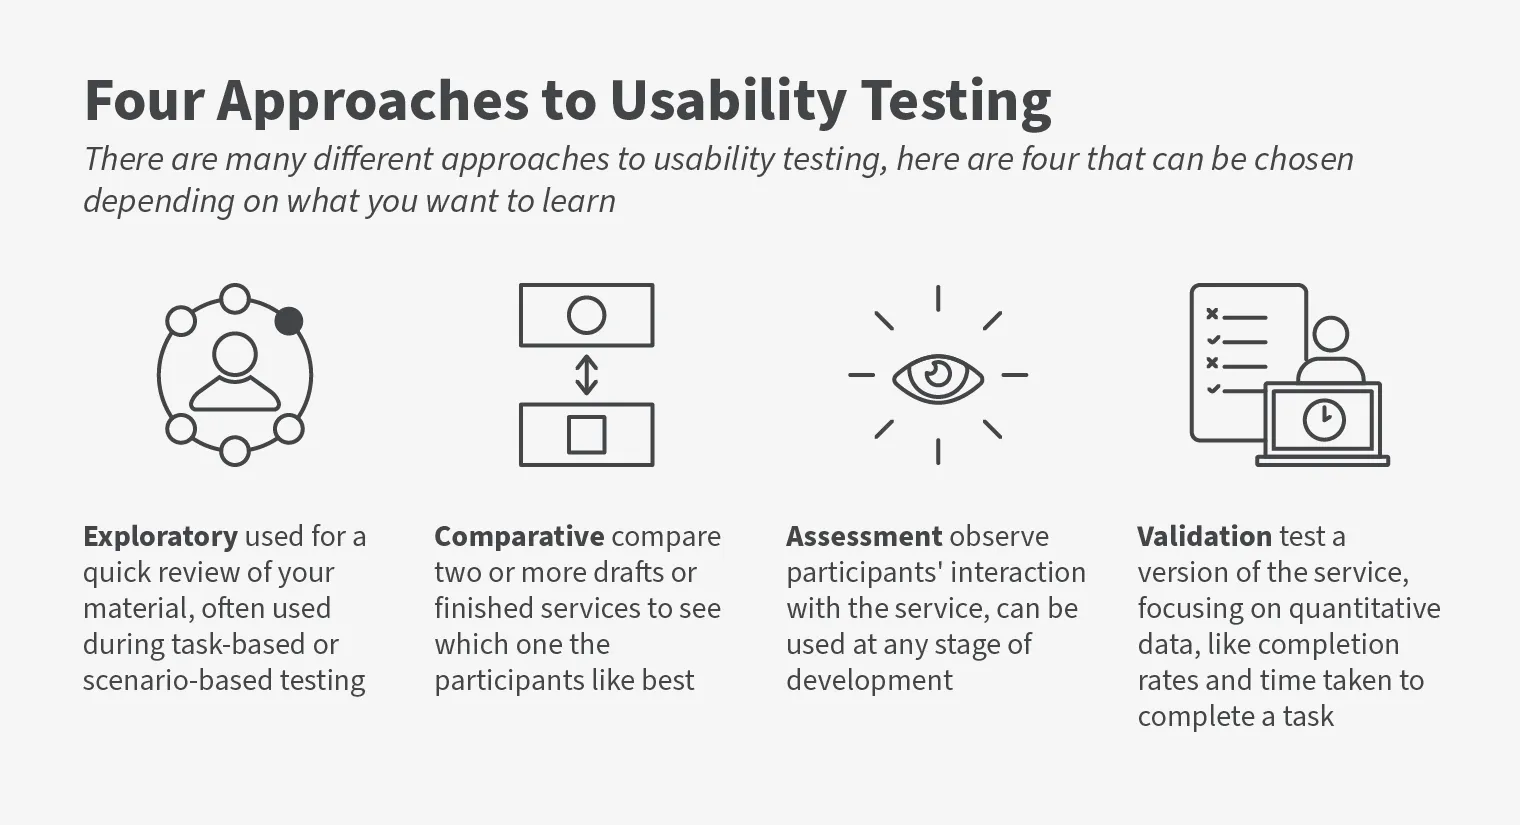 4 Approaches to Usability Testing. There are many different approaches to usability testing, here are 4 that can be chosen depending on what you want to learn. Explorative – quick review of the material, used during task-based or scenario-based testing. Comparative - compare 2 or more drafts/finished services to see which the participants like best. Assessment - observe participants’ interaction with the service, used at any stage of dev. Validation – test the service, focus on quantitative data.